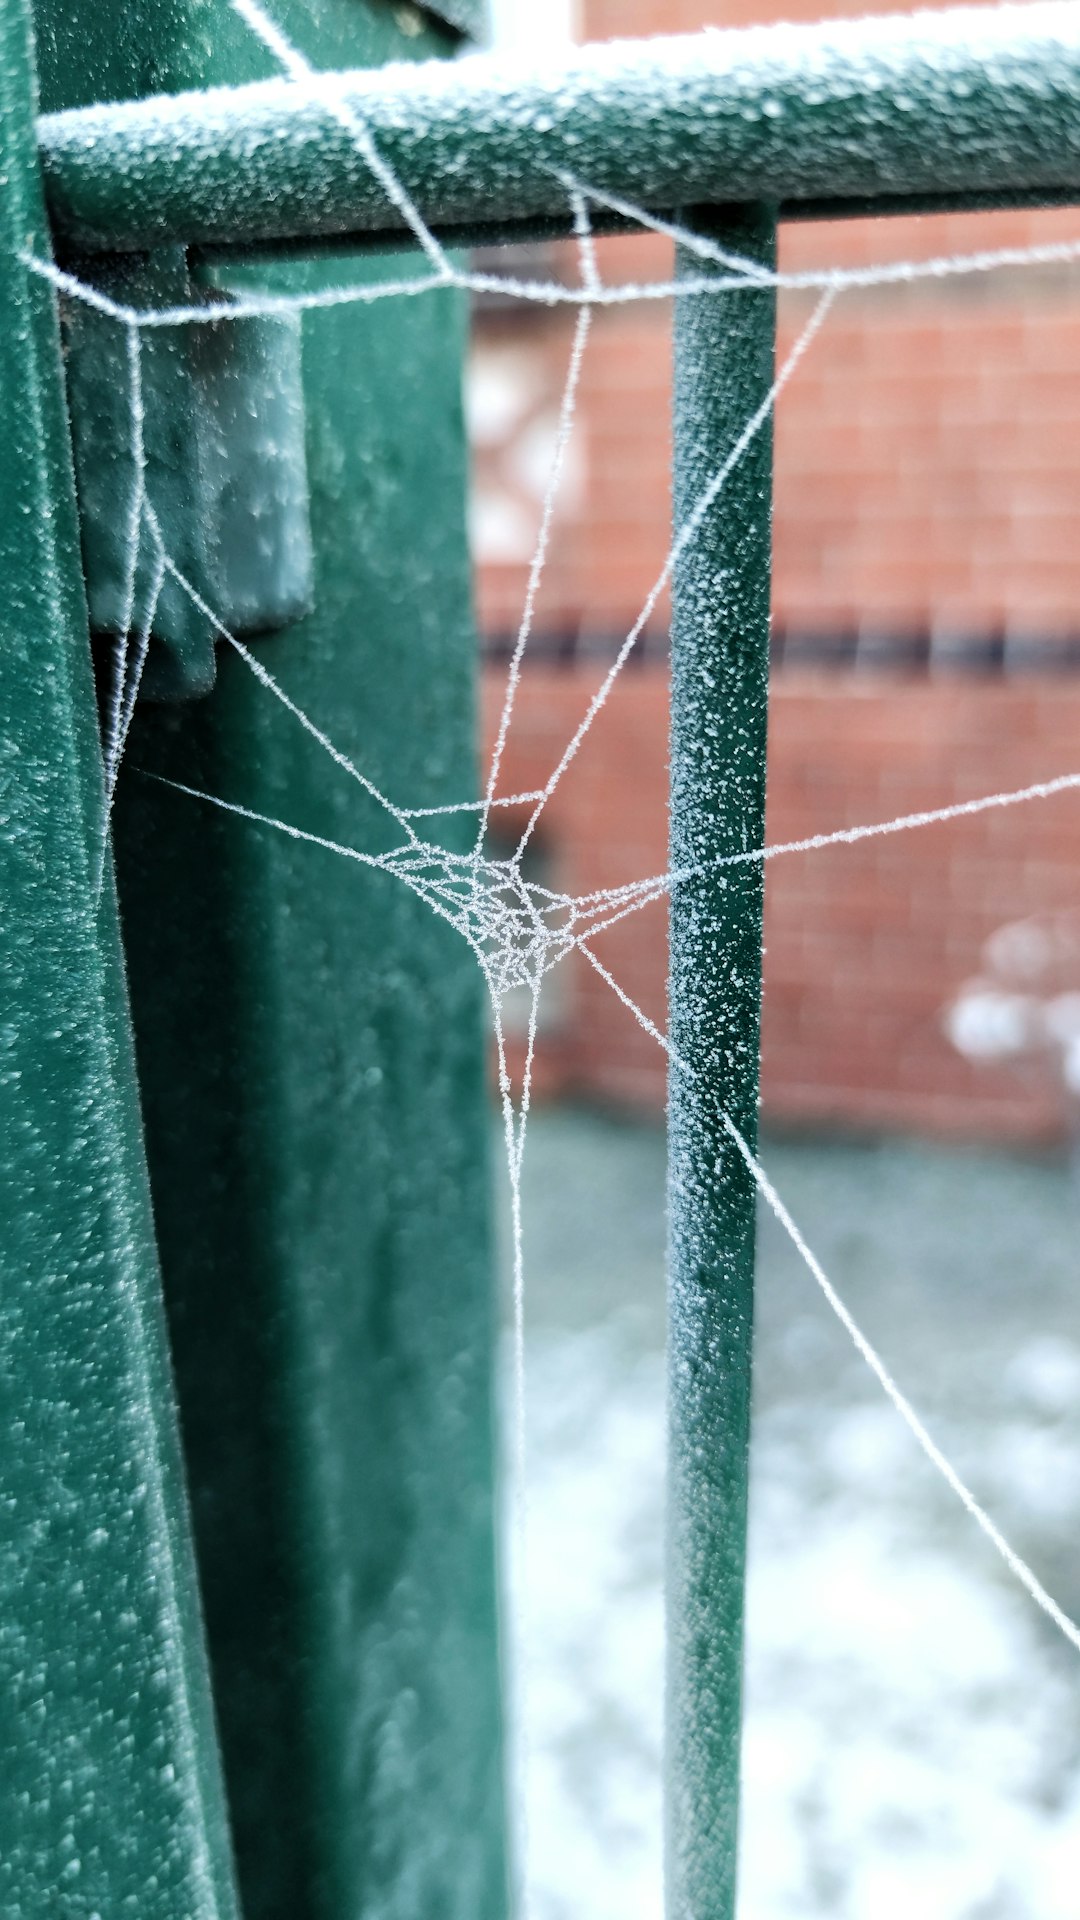 spider web on green metal fence